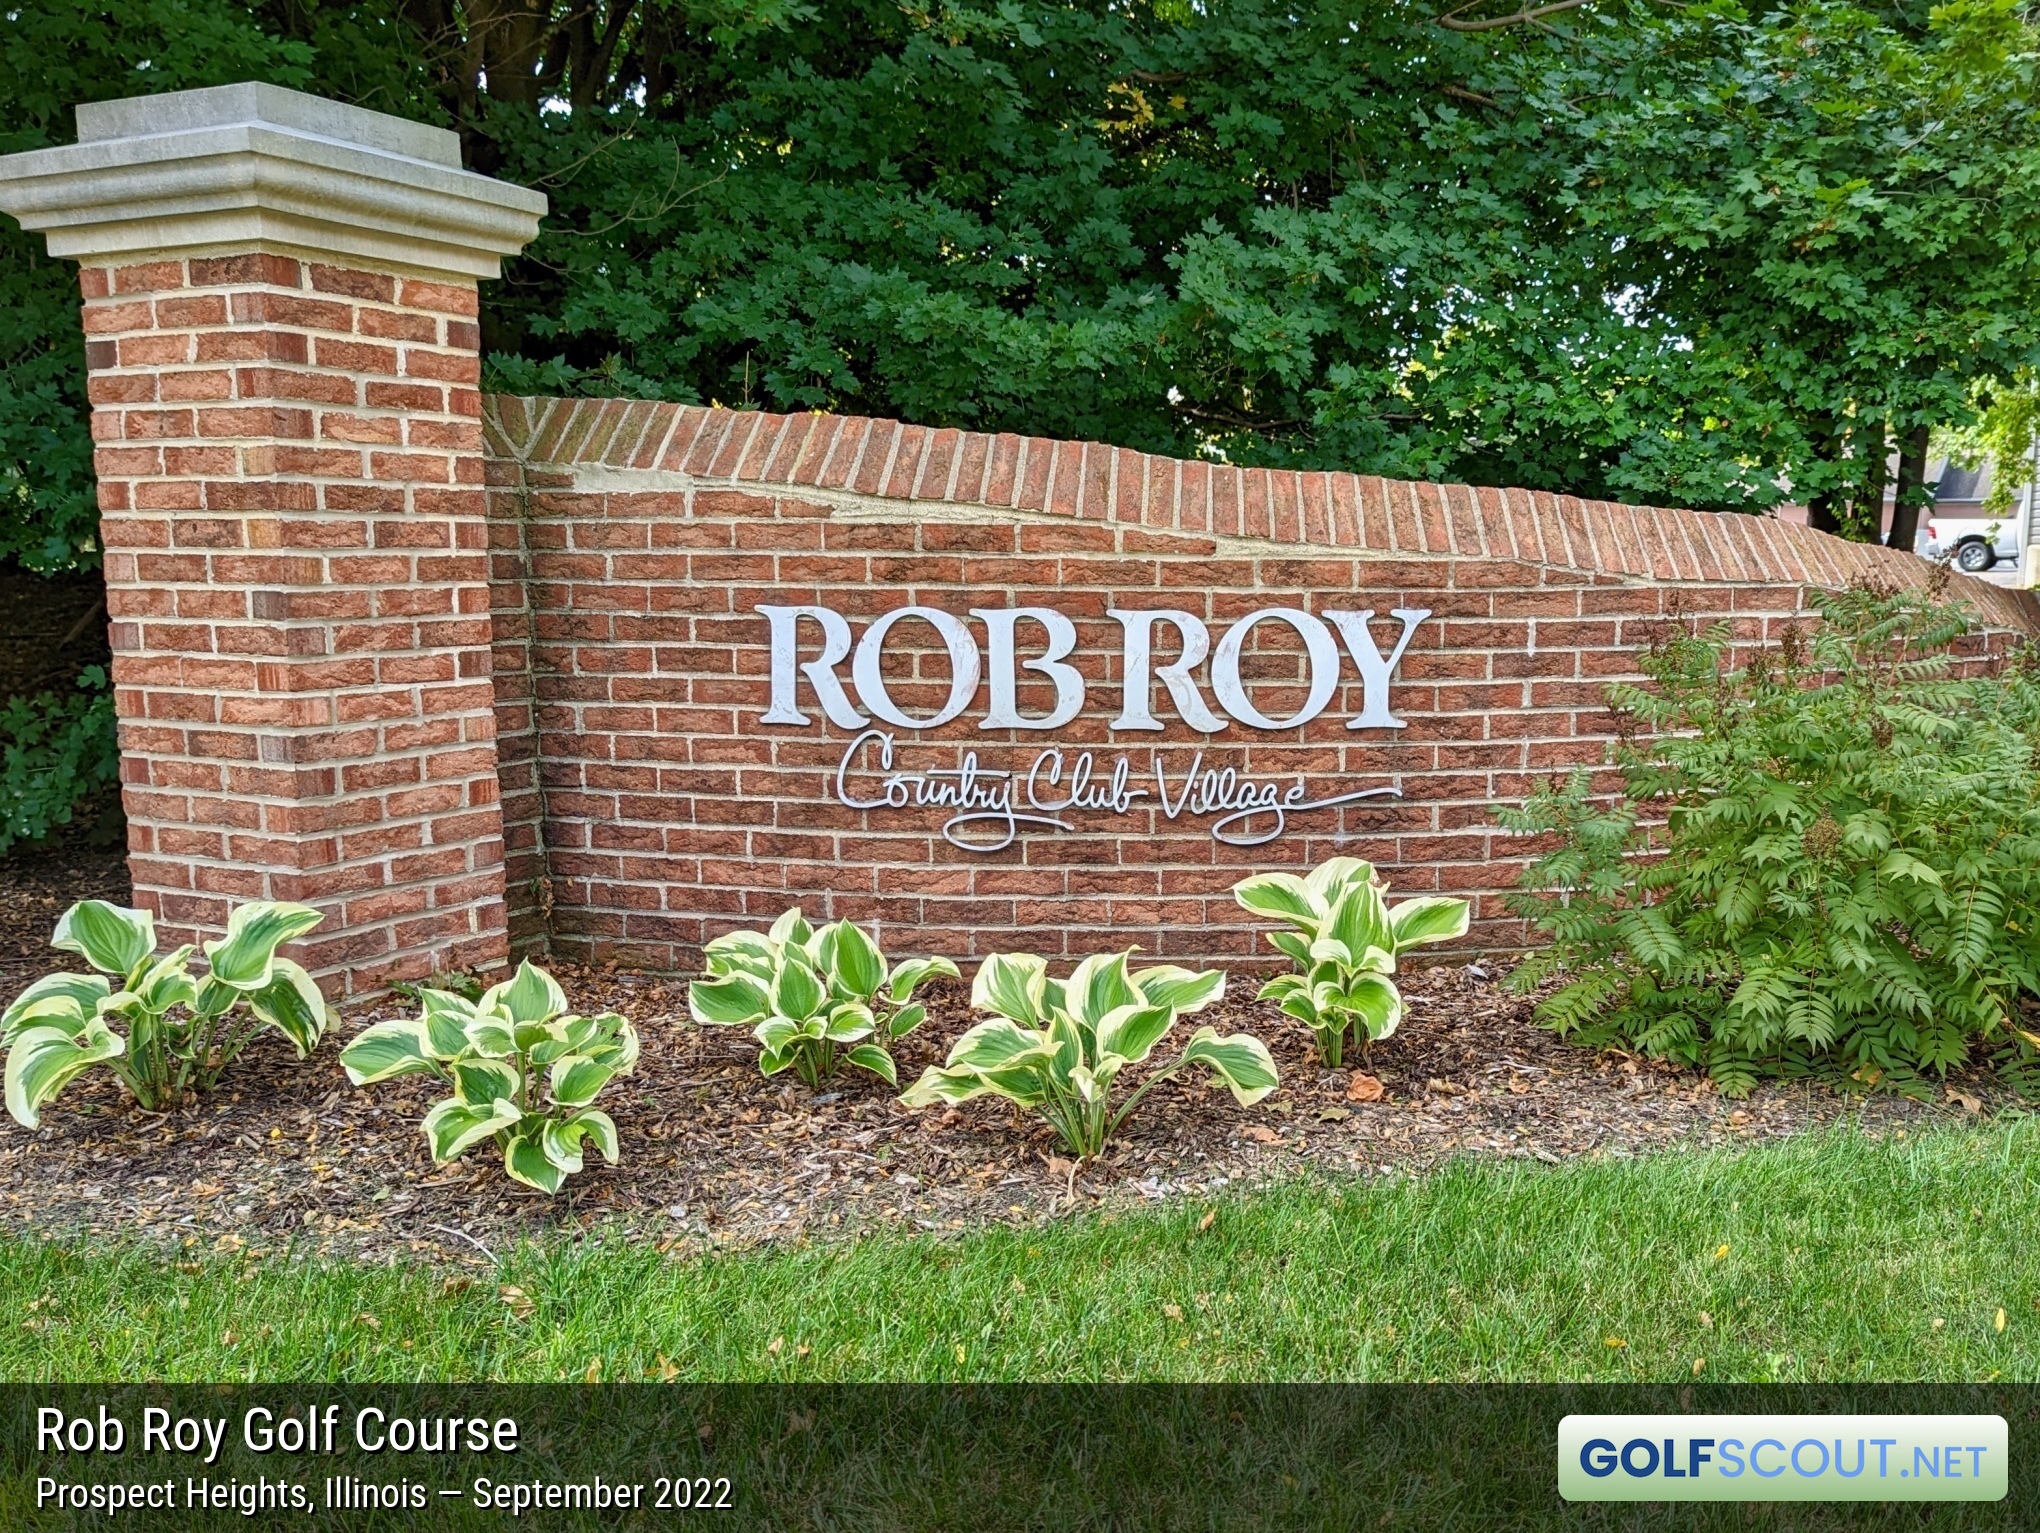 Sign at the entrance to Rob Roy Golf Course